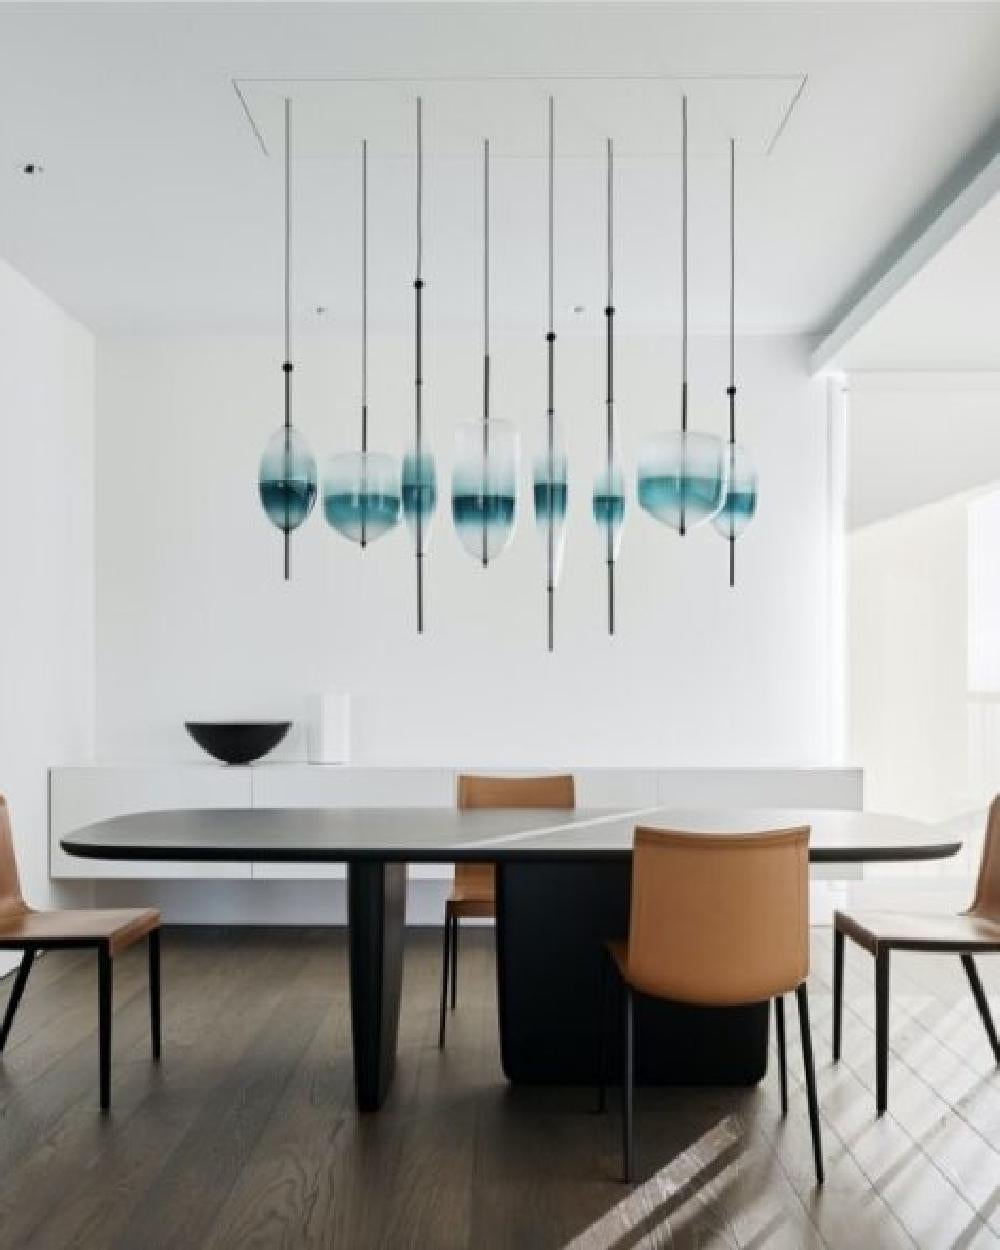 FLOW[T] S1 Pendant lamp in Turquoise by Nao Tamura for Wonderglass For Sale 1